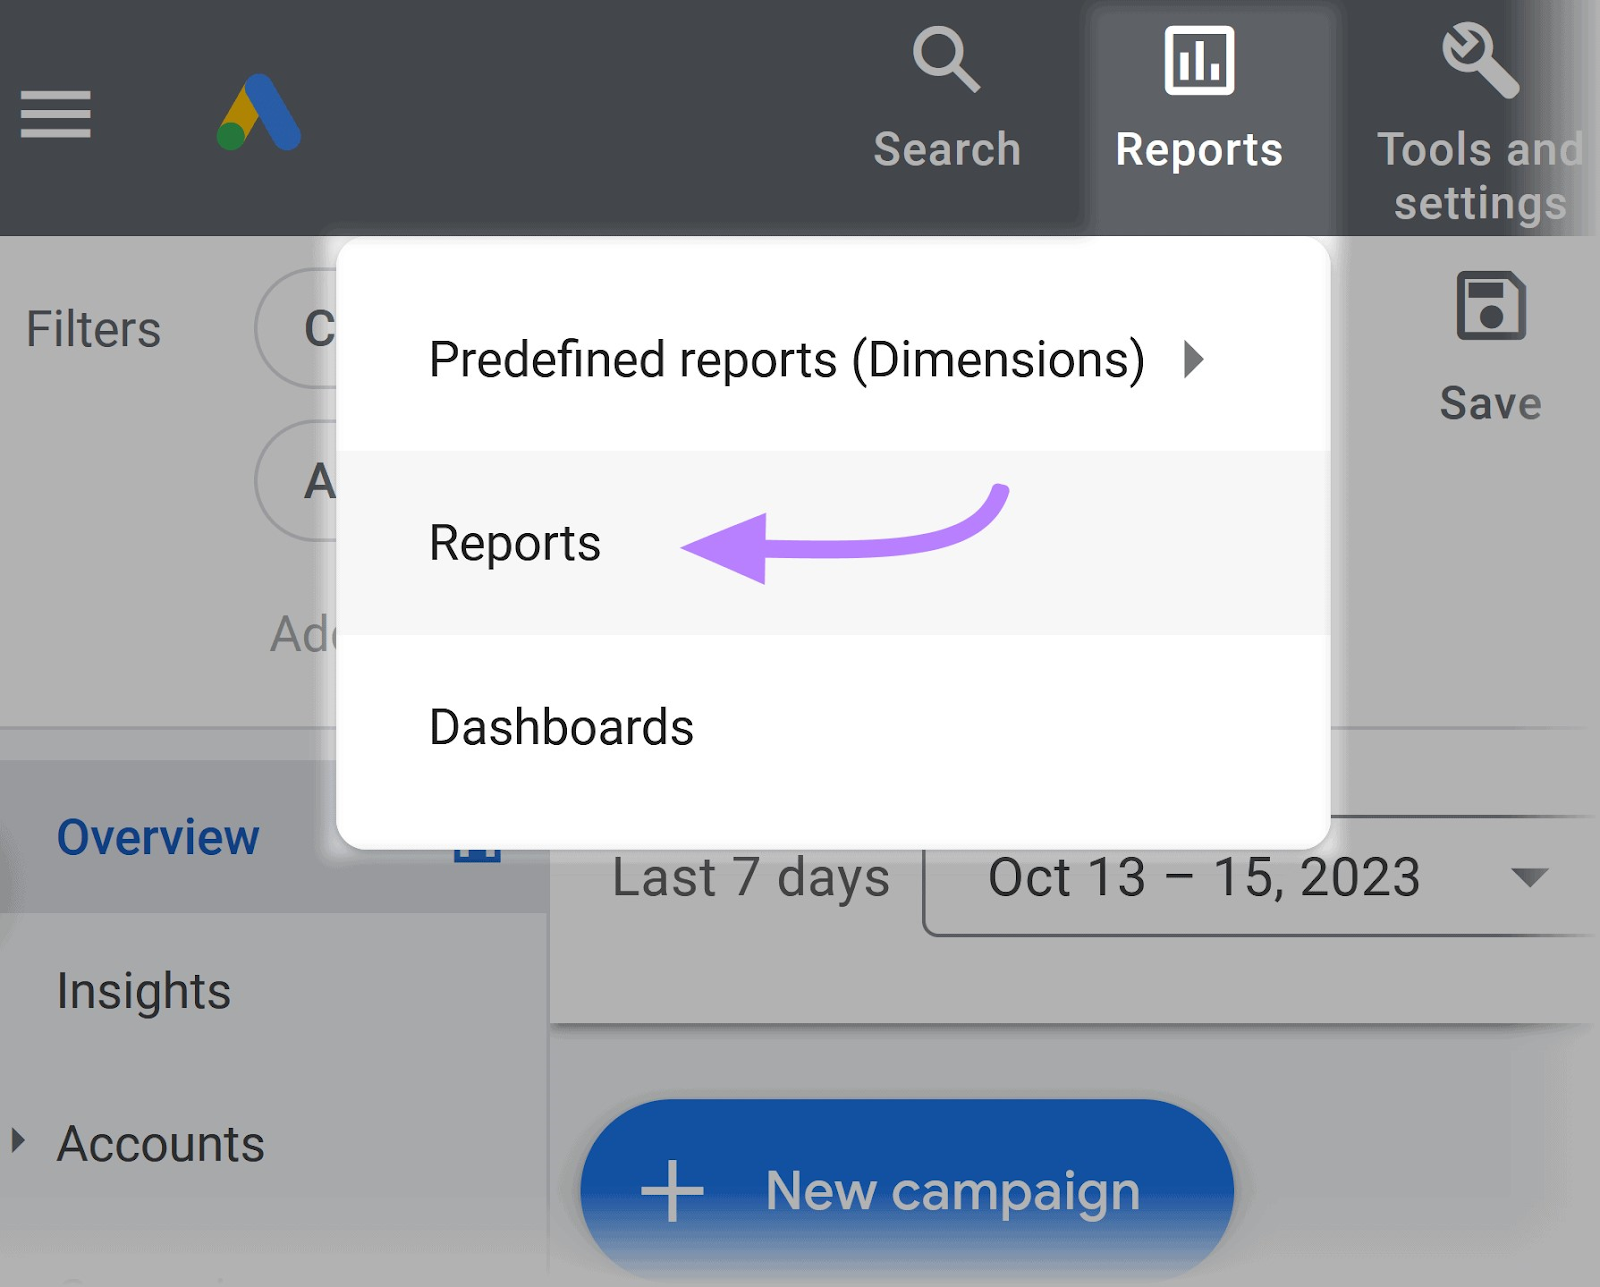 "Reports" selected from the Google Ads Manager top navigation